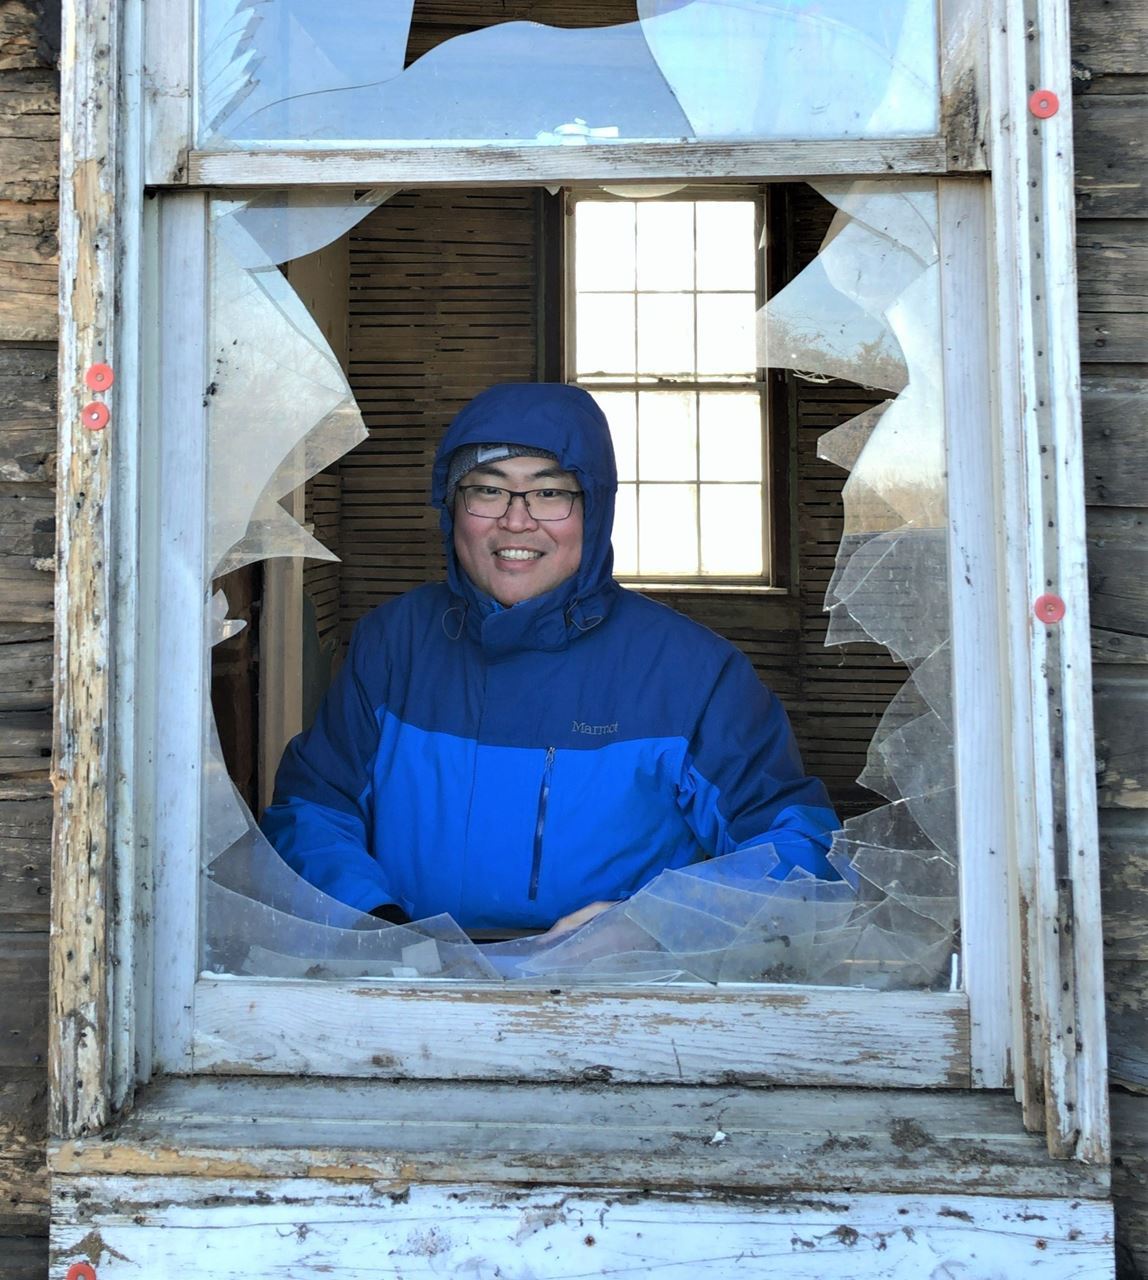 Daniel De Sousa in his natural environment, taking a window detail with profile comb and pencil at a house recently acquired by Manassas National Battlefield Park. Photo courtesy of Daniel De Sousa.